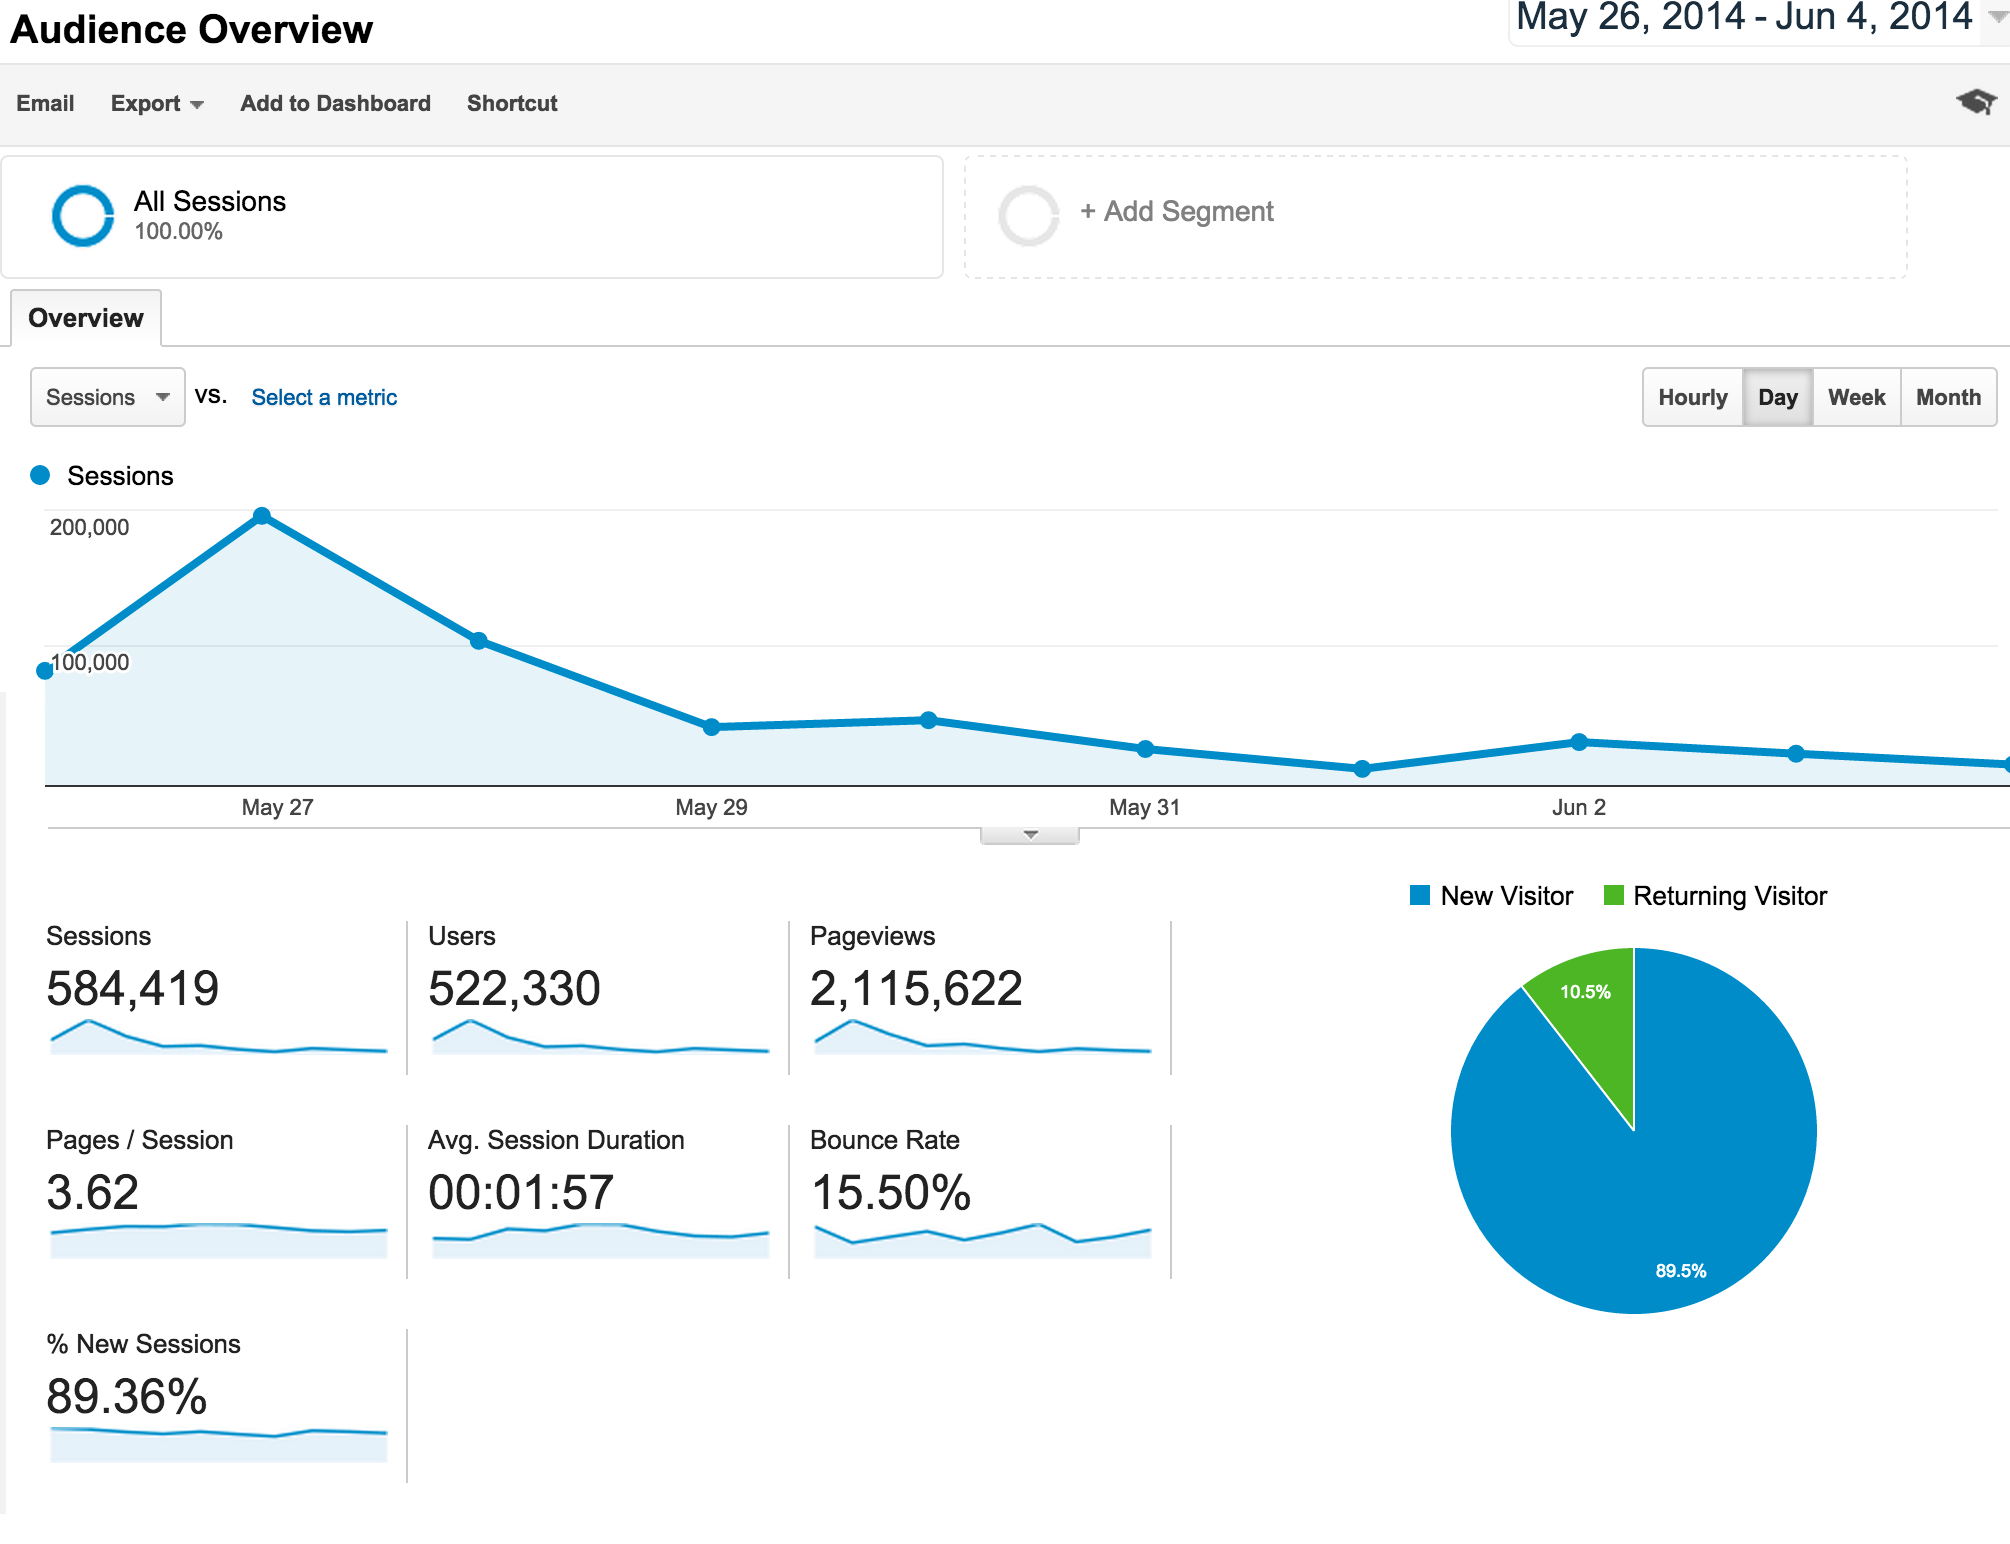 google analytics screenshot showing traffic results from May 26th, 2014 to June 4th 2014